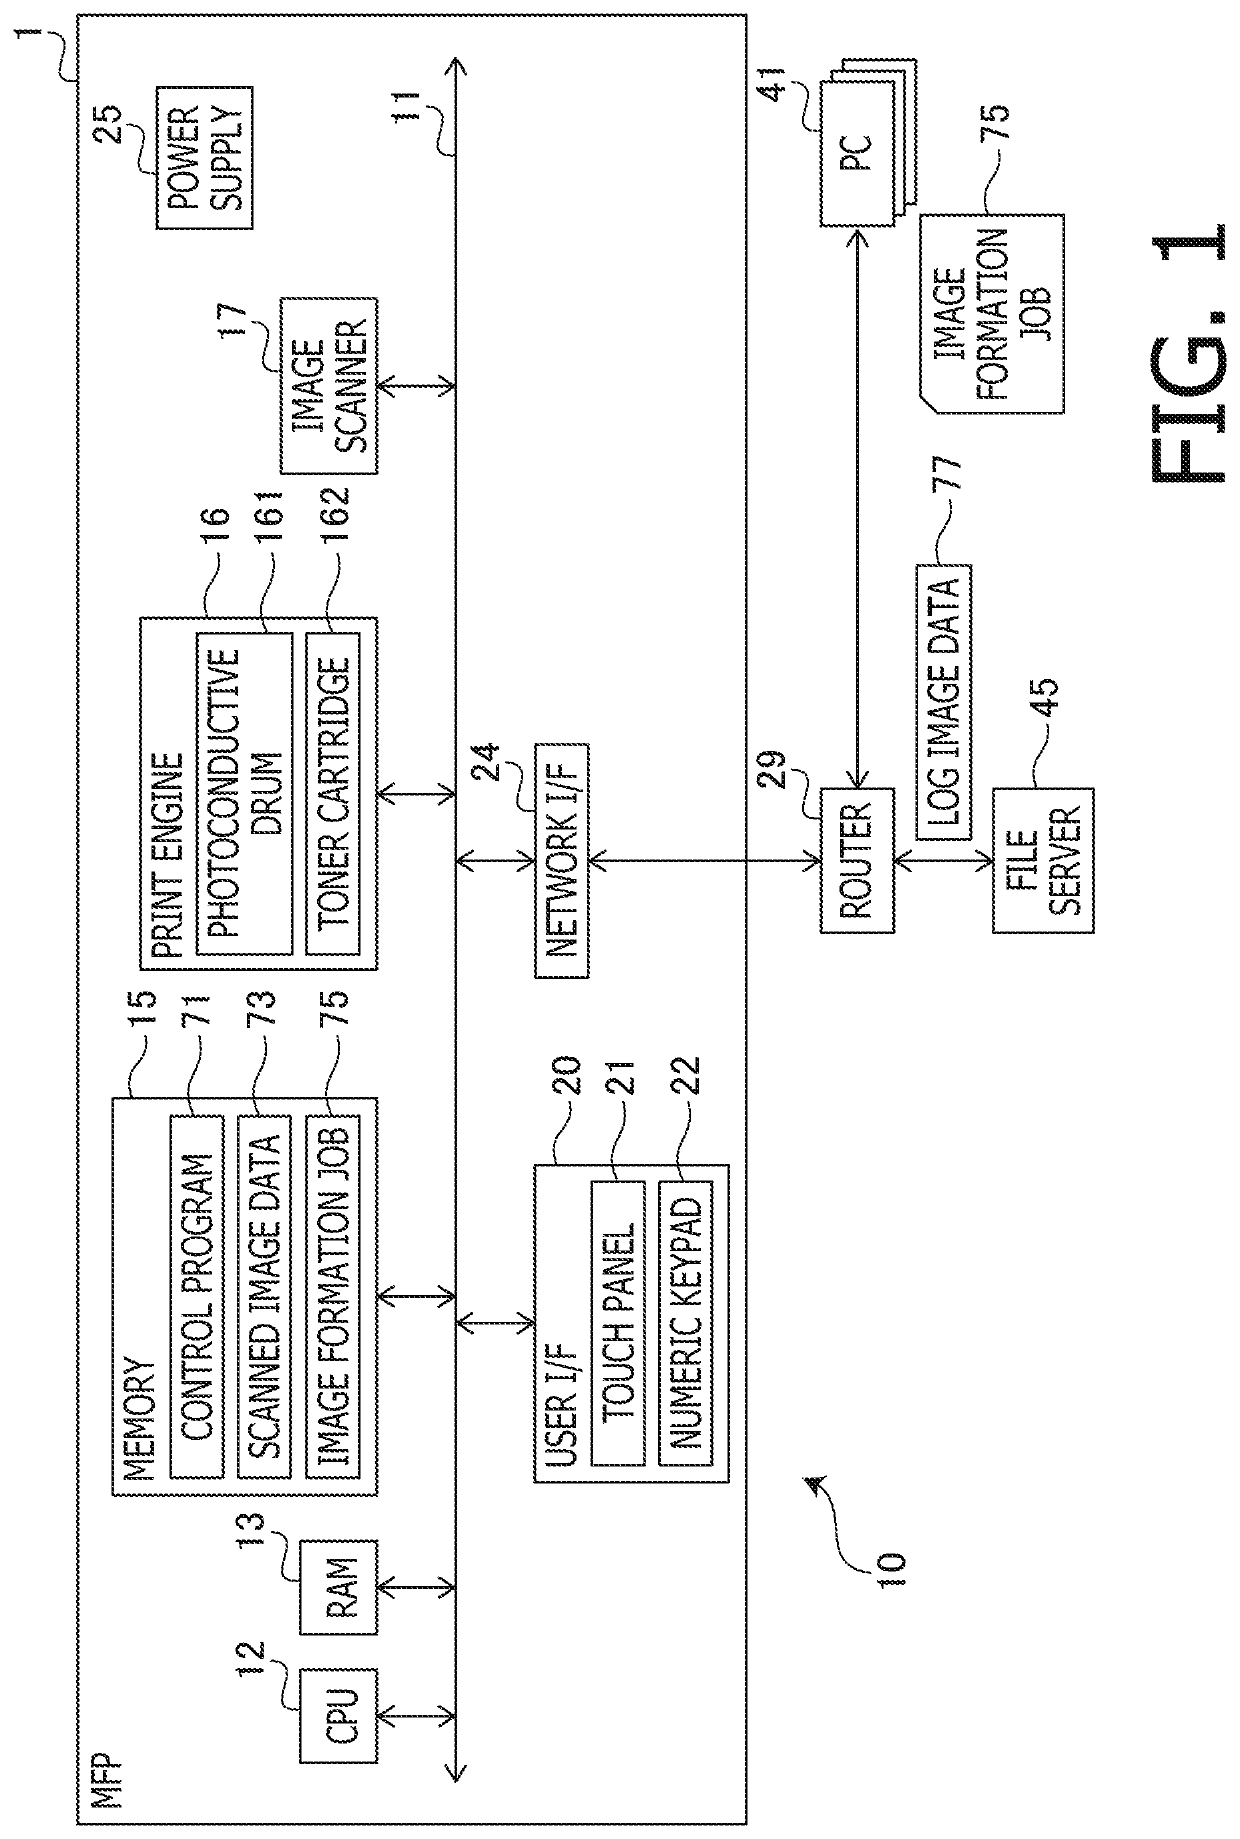 Image processing apparatus, method, and computer-readable medium for providing appropriate log image data